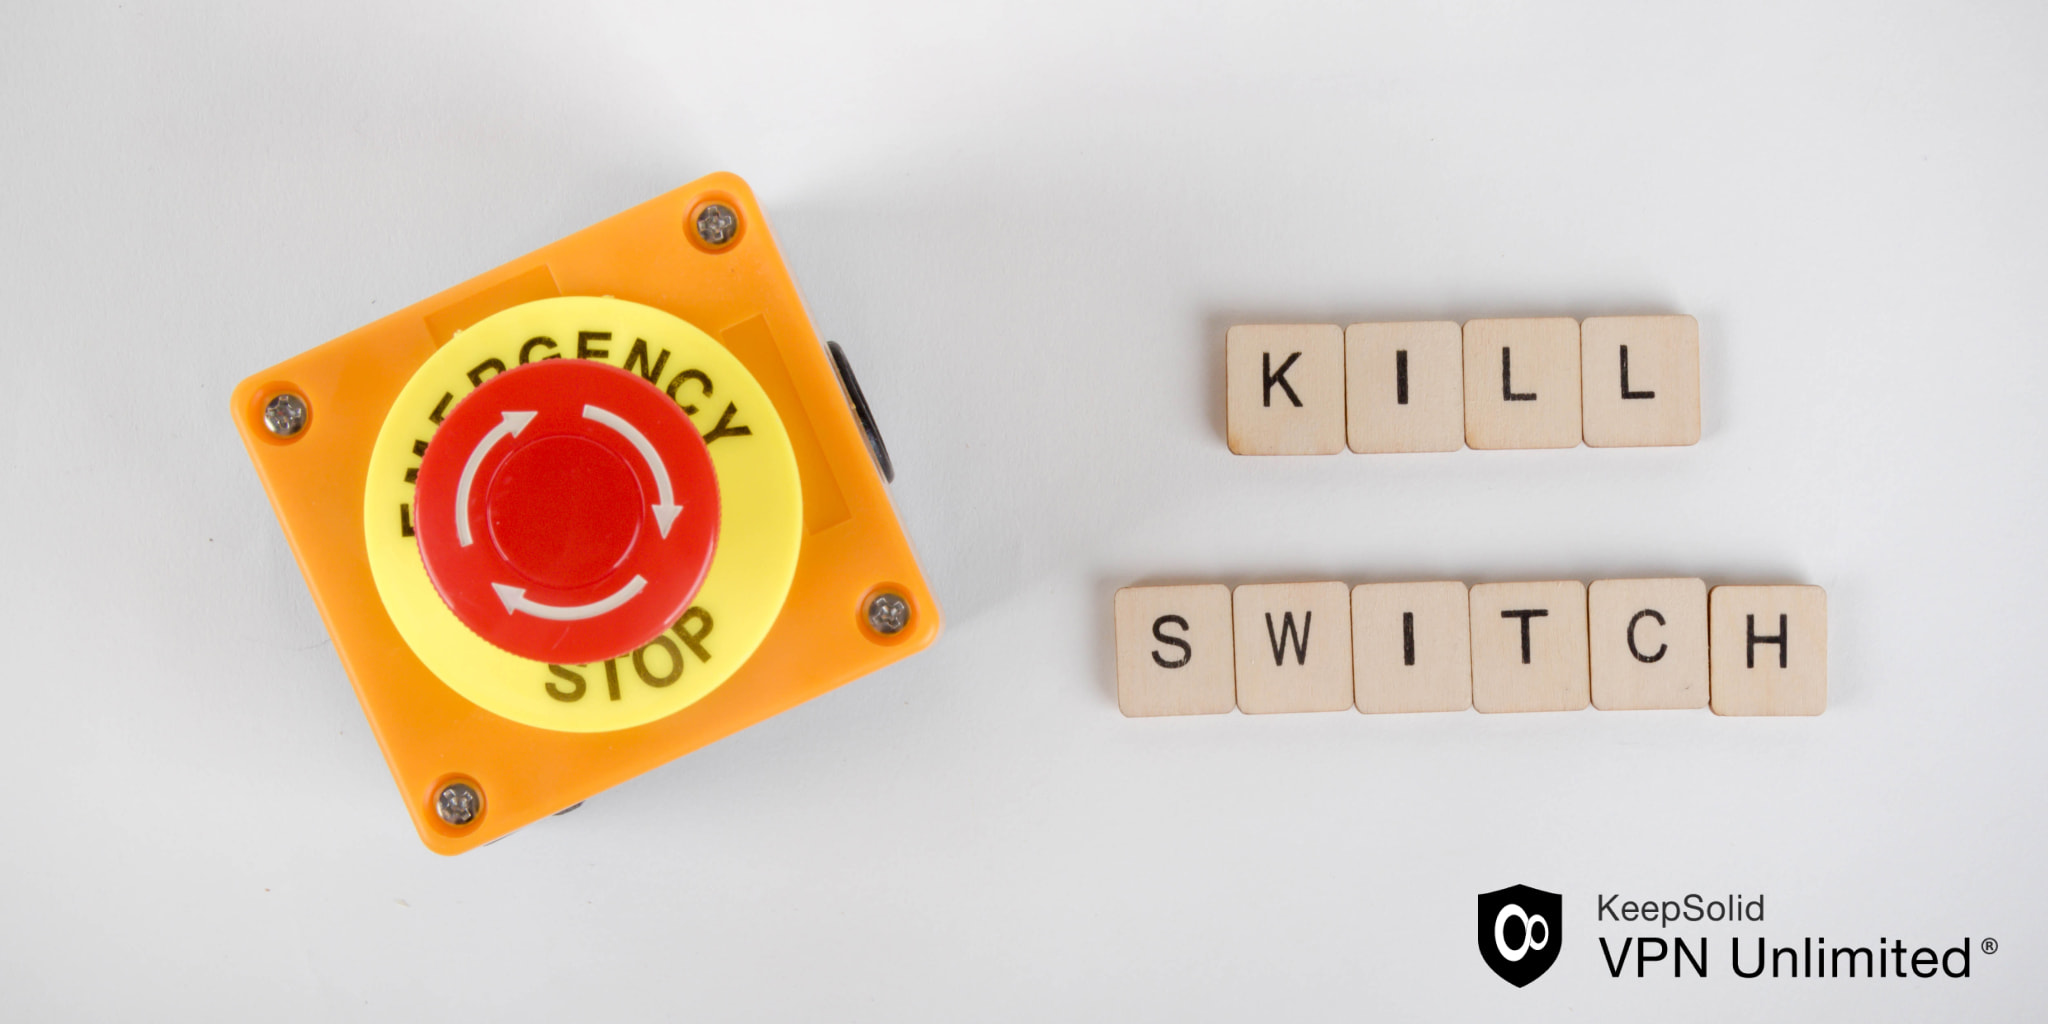 Why Kill Switch is Crucial for VPN Service on Windows